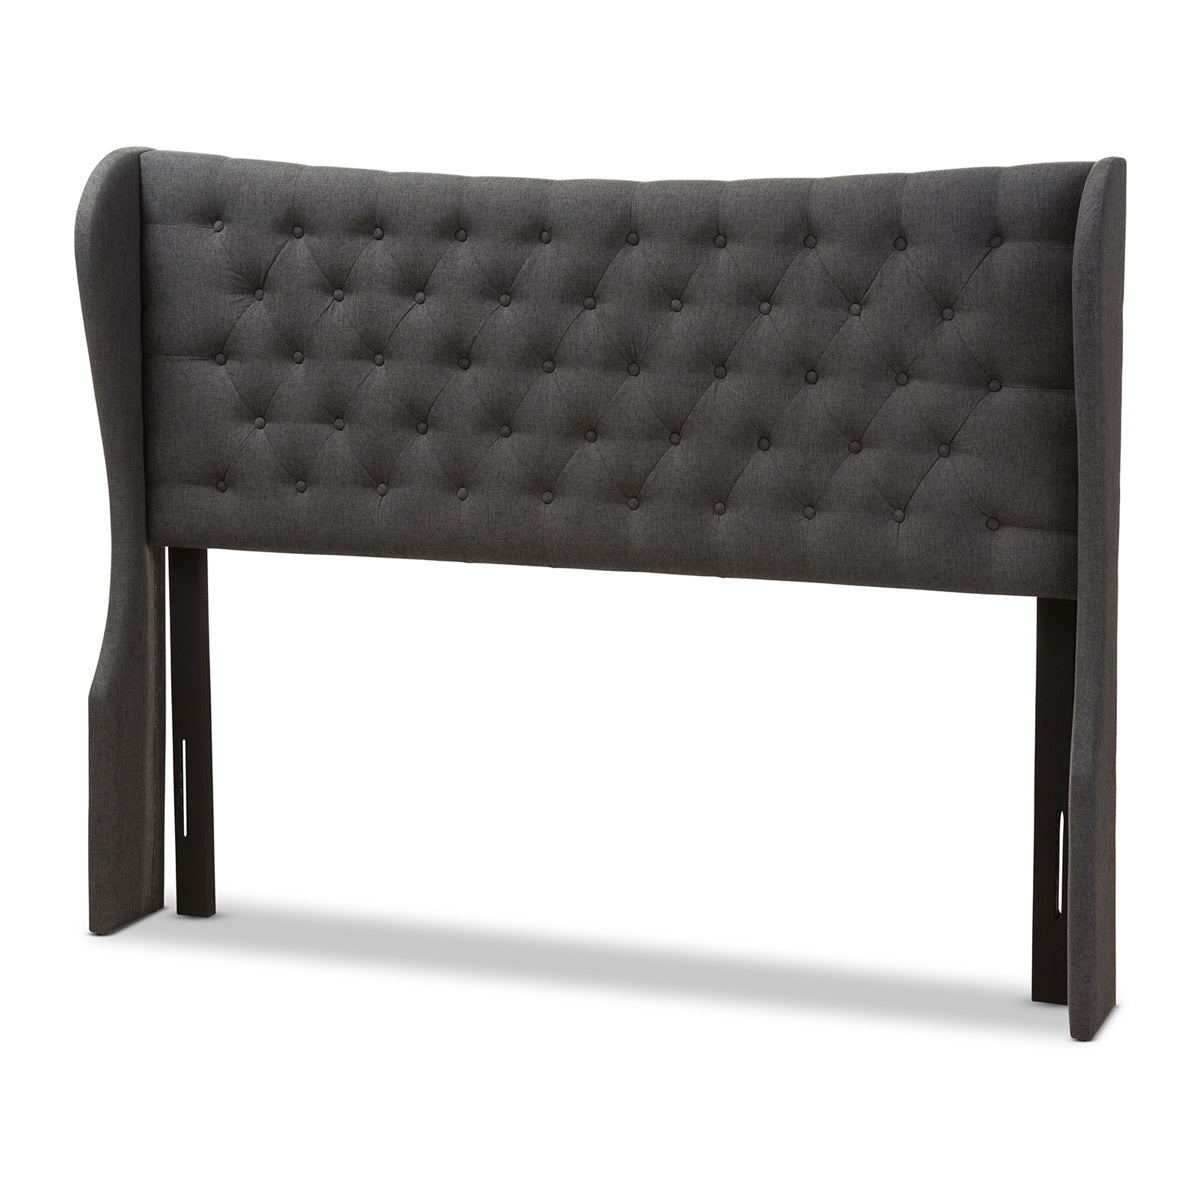 Baxton Studio Cadence Modern and Contemporary Dark Grey Fabric Button-Tufted Queen Size Winged Headboard Baxton Studio-Headboards-Minimal And Modern - 1